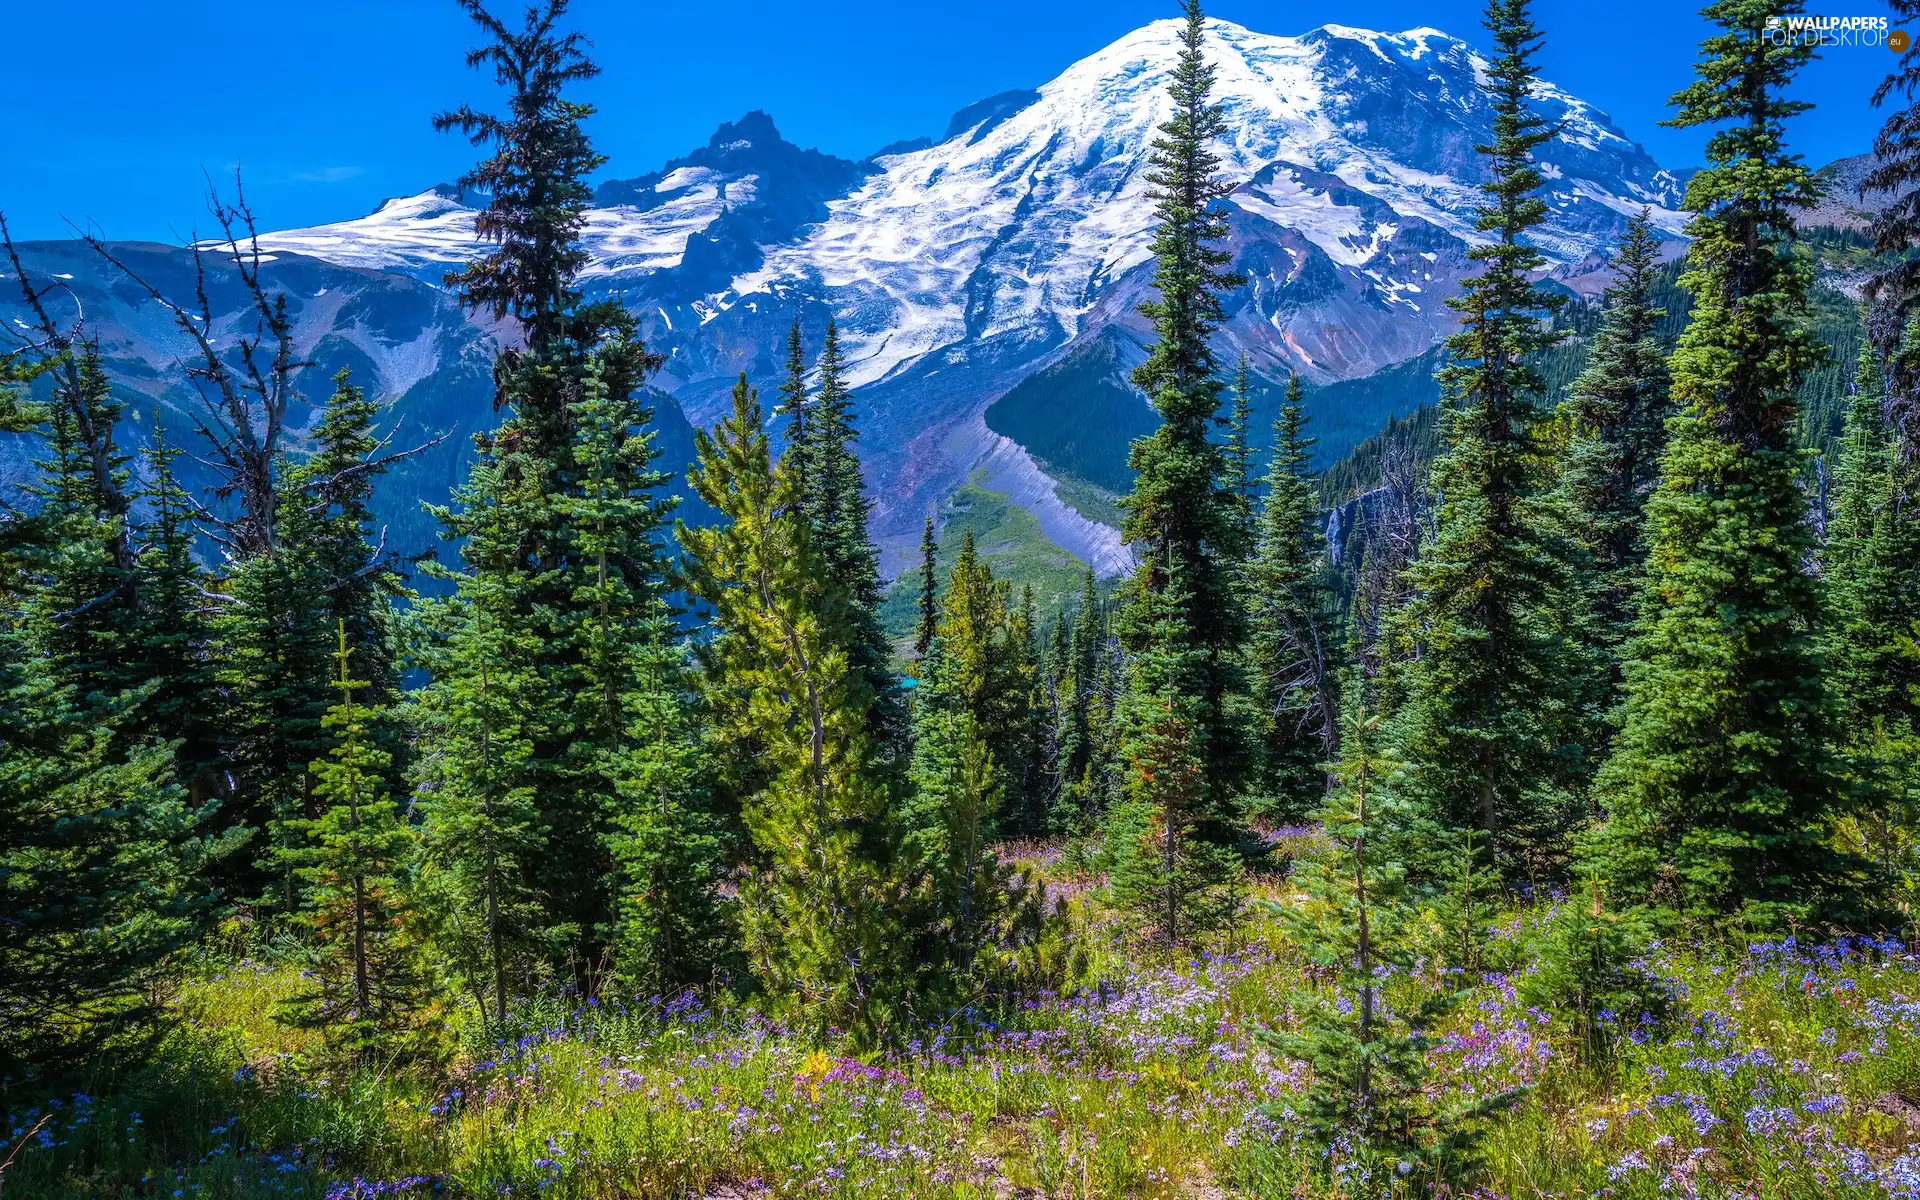 Mountains, Snowy, trees, viewes, Washington State, The United States, Flowers, Mount Rainier National Park, Spruces